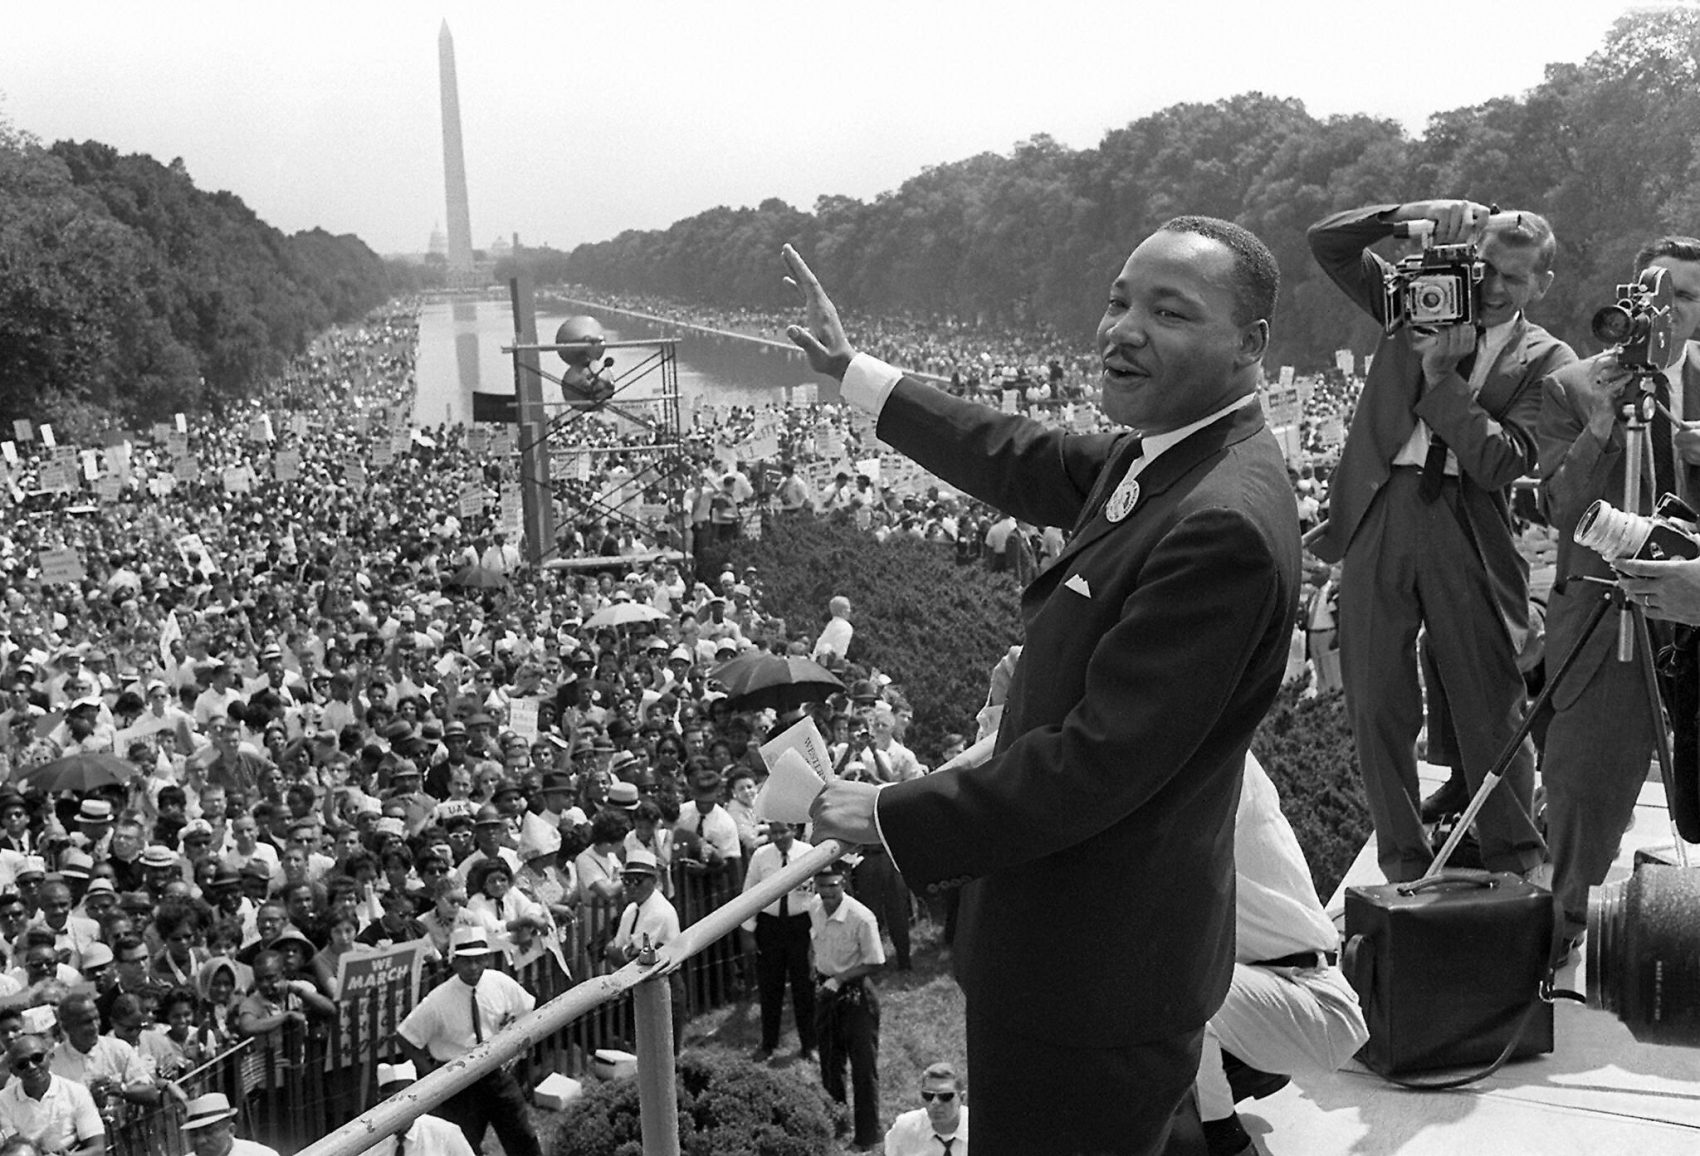 Martin Luther King Jr. waves to supporters from the steps of the Lincoln Memorial in Washington, D.C., during the March on Washington where King delivered his famous &quot;I Have a Dream&quot; speech on Aug. 28, 1963. (AFP/Getty Images)